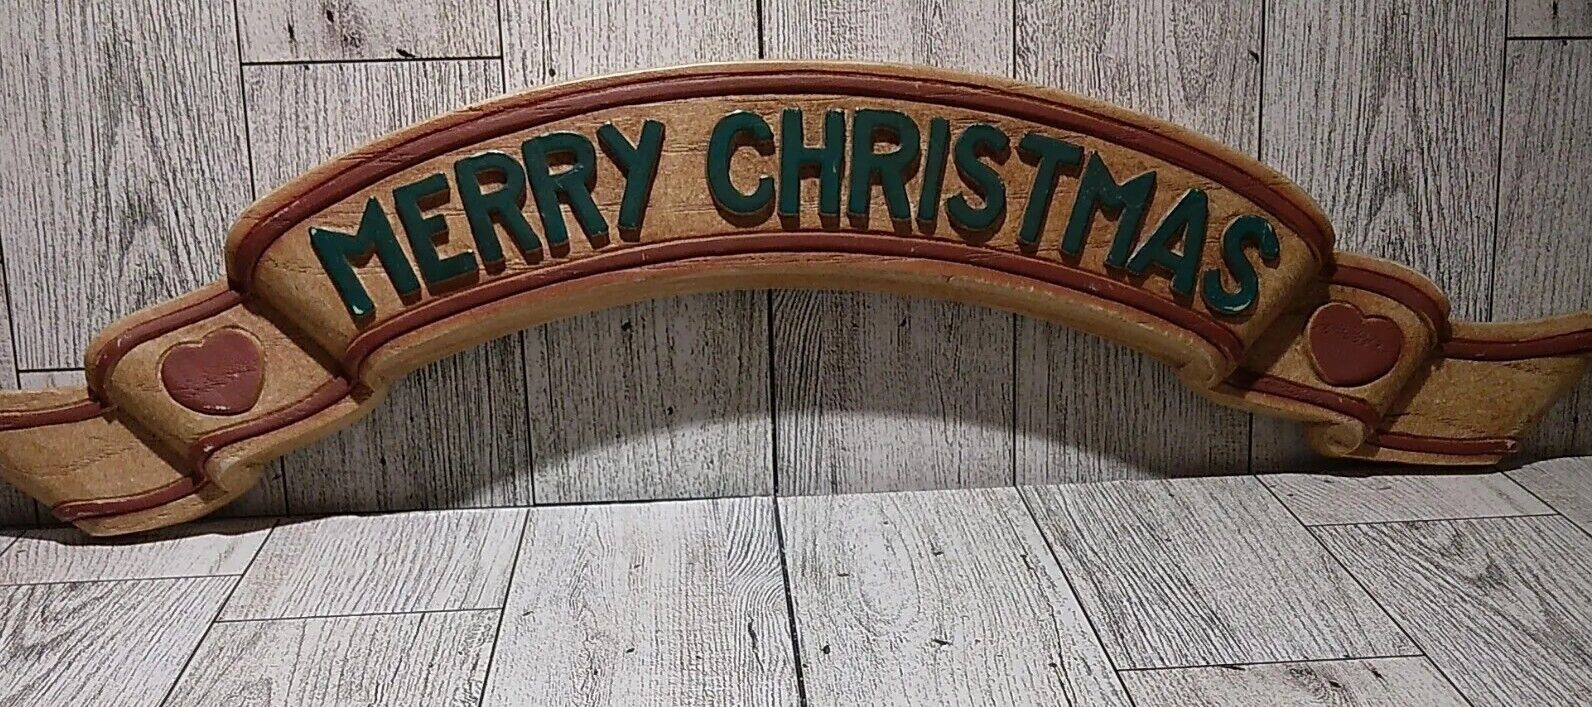 Homco Merry Christmas Wall Hanging Decorations